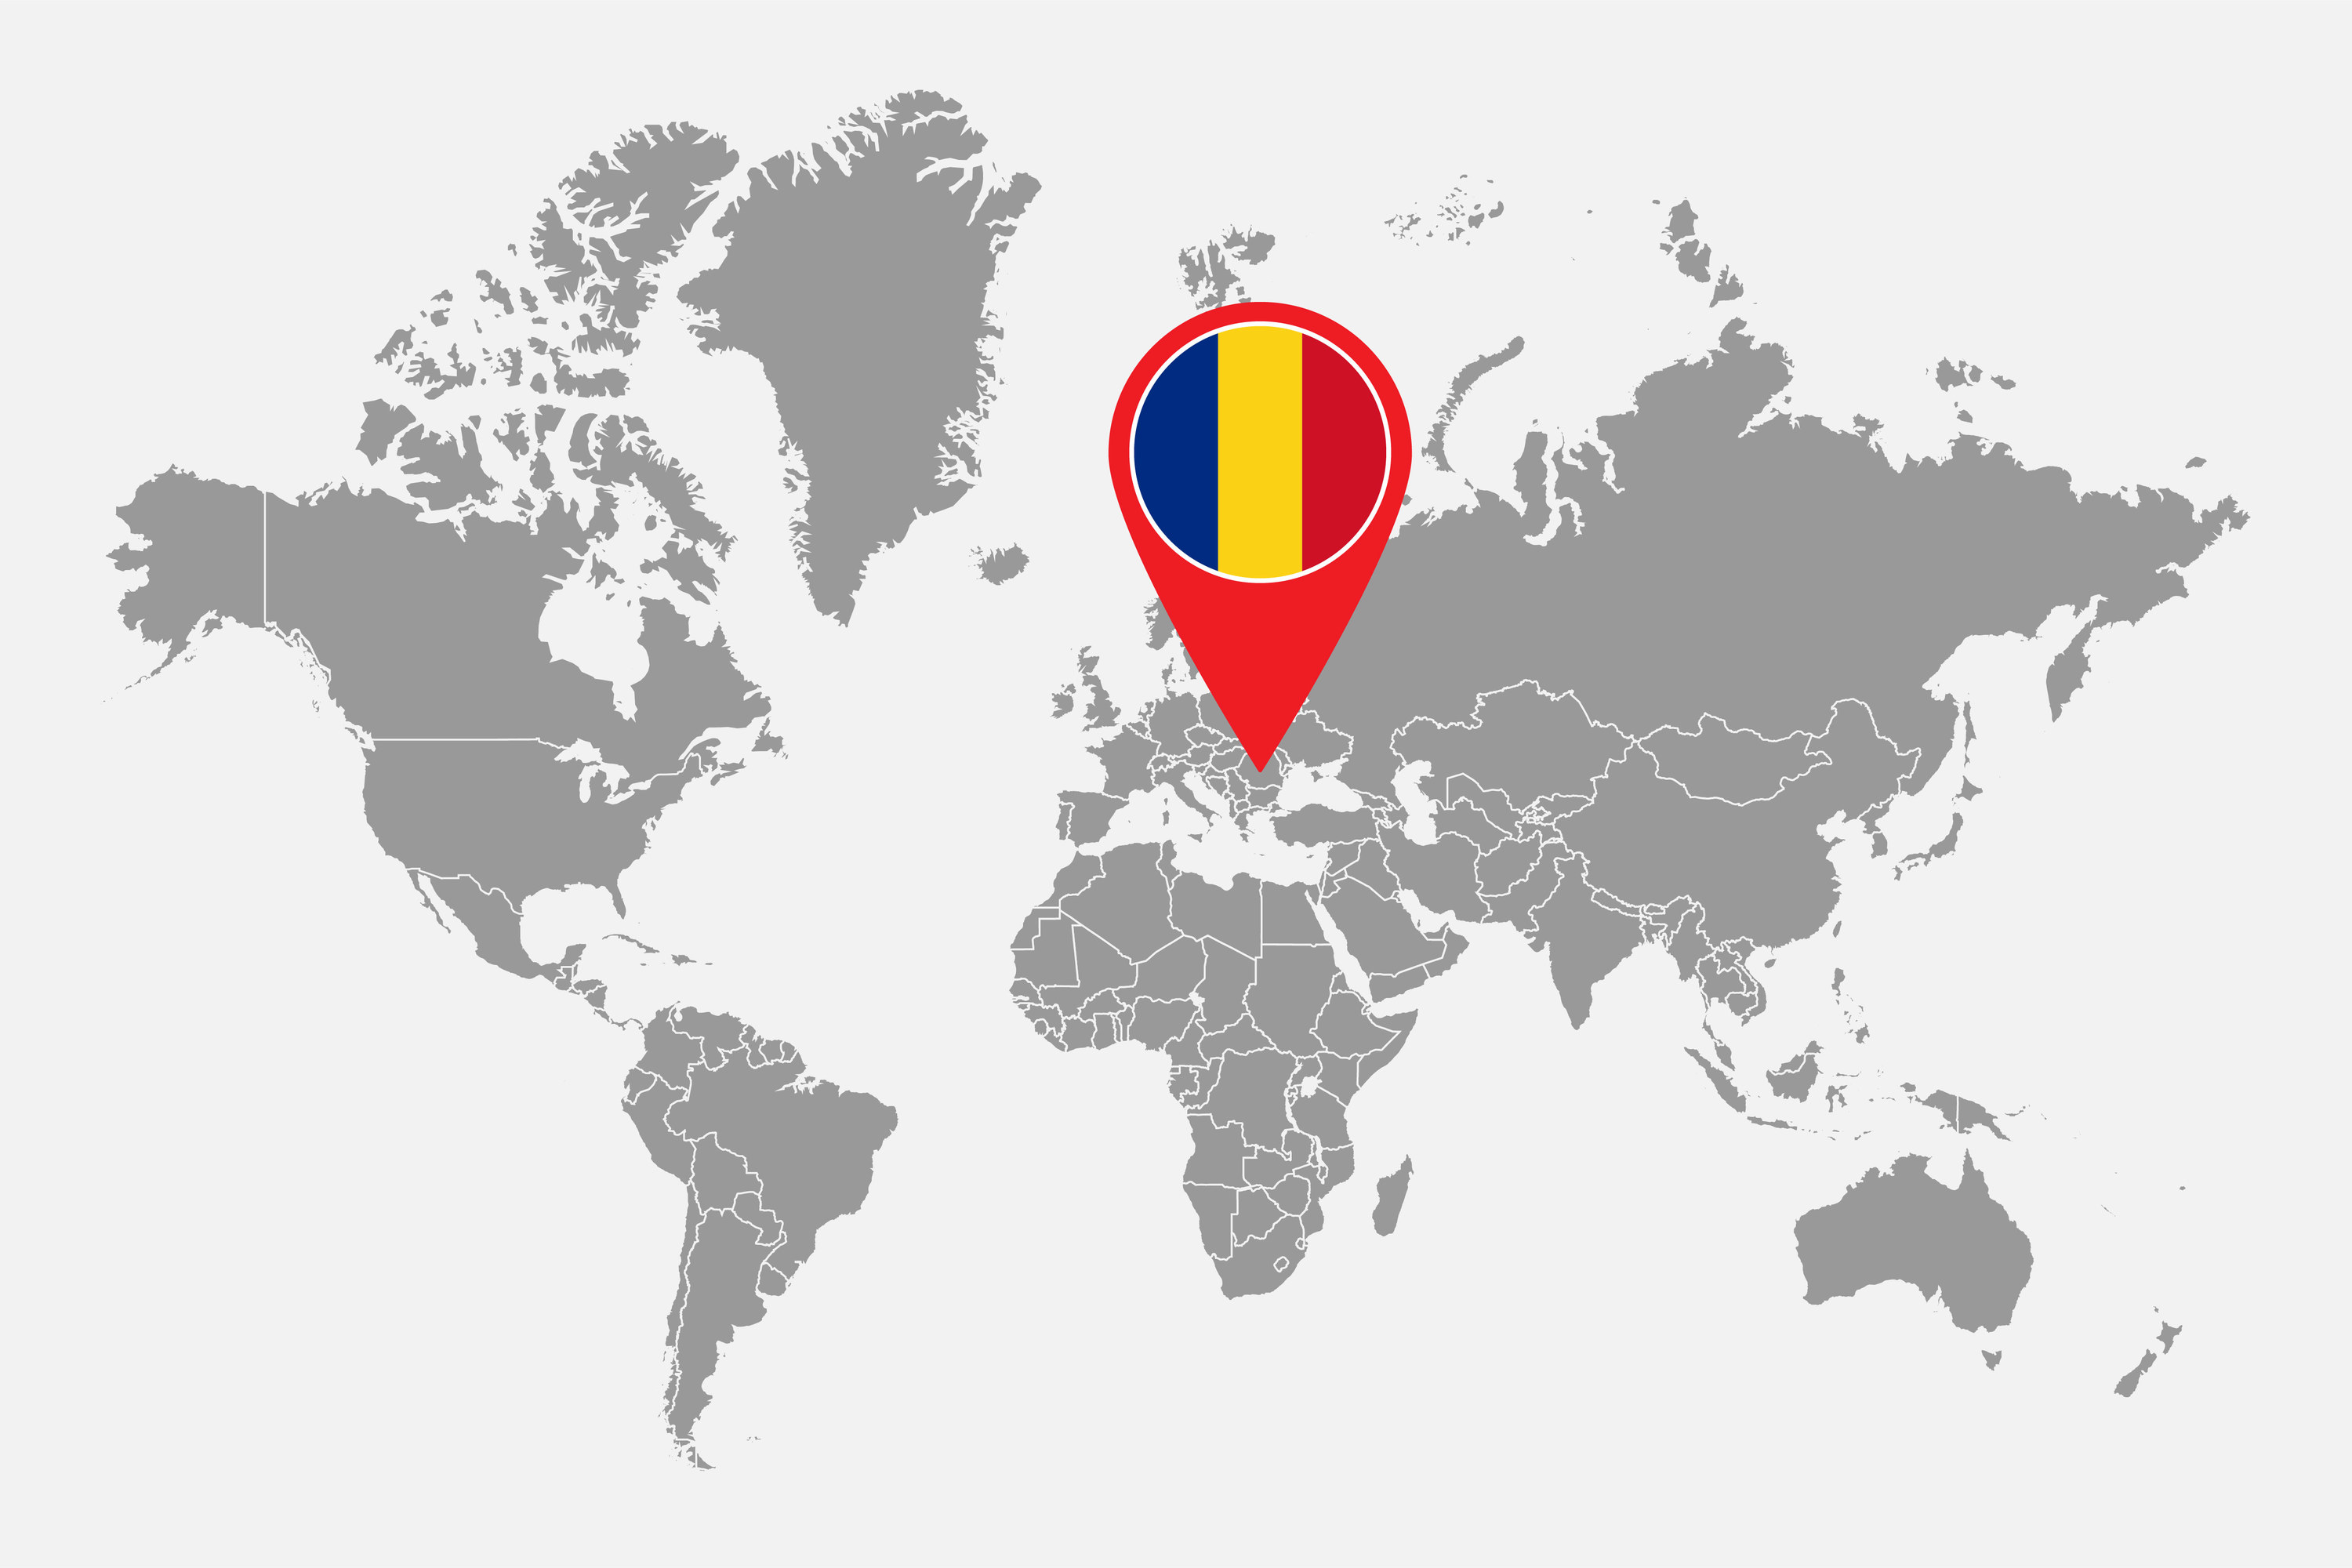 A world map with Romania indicated